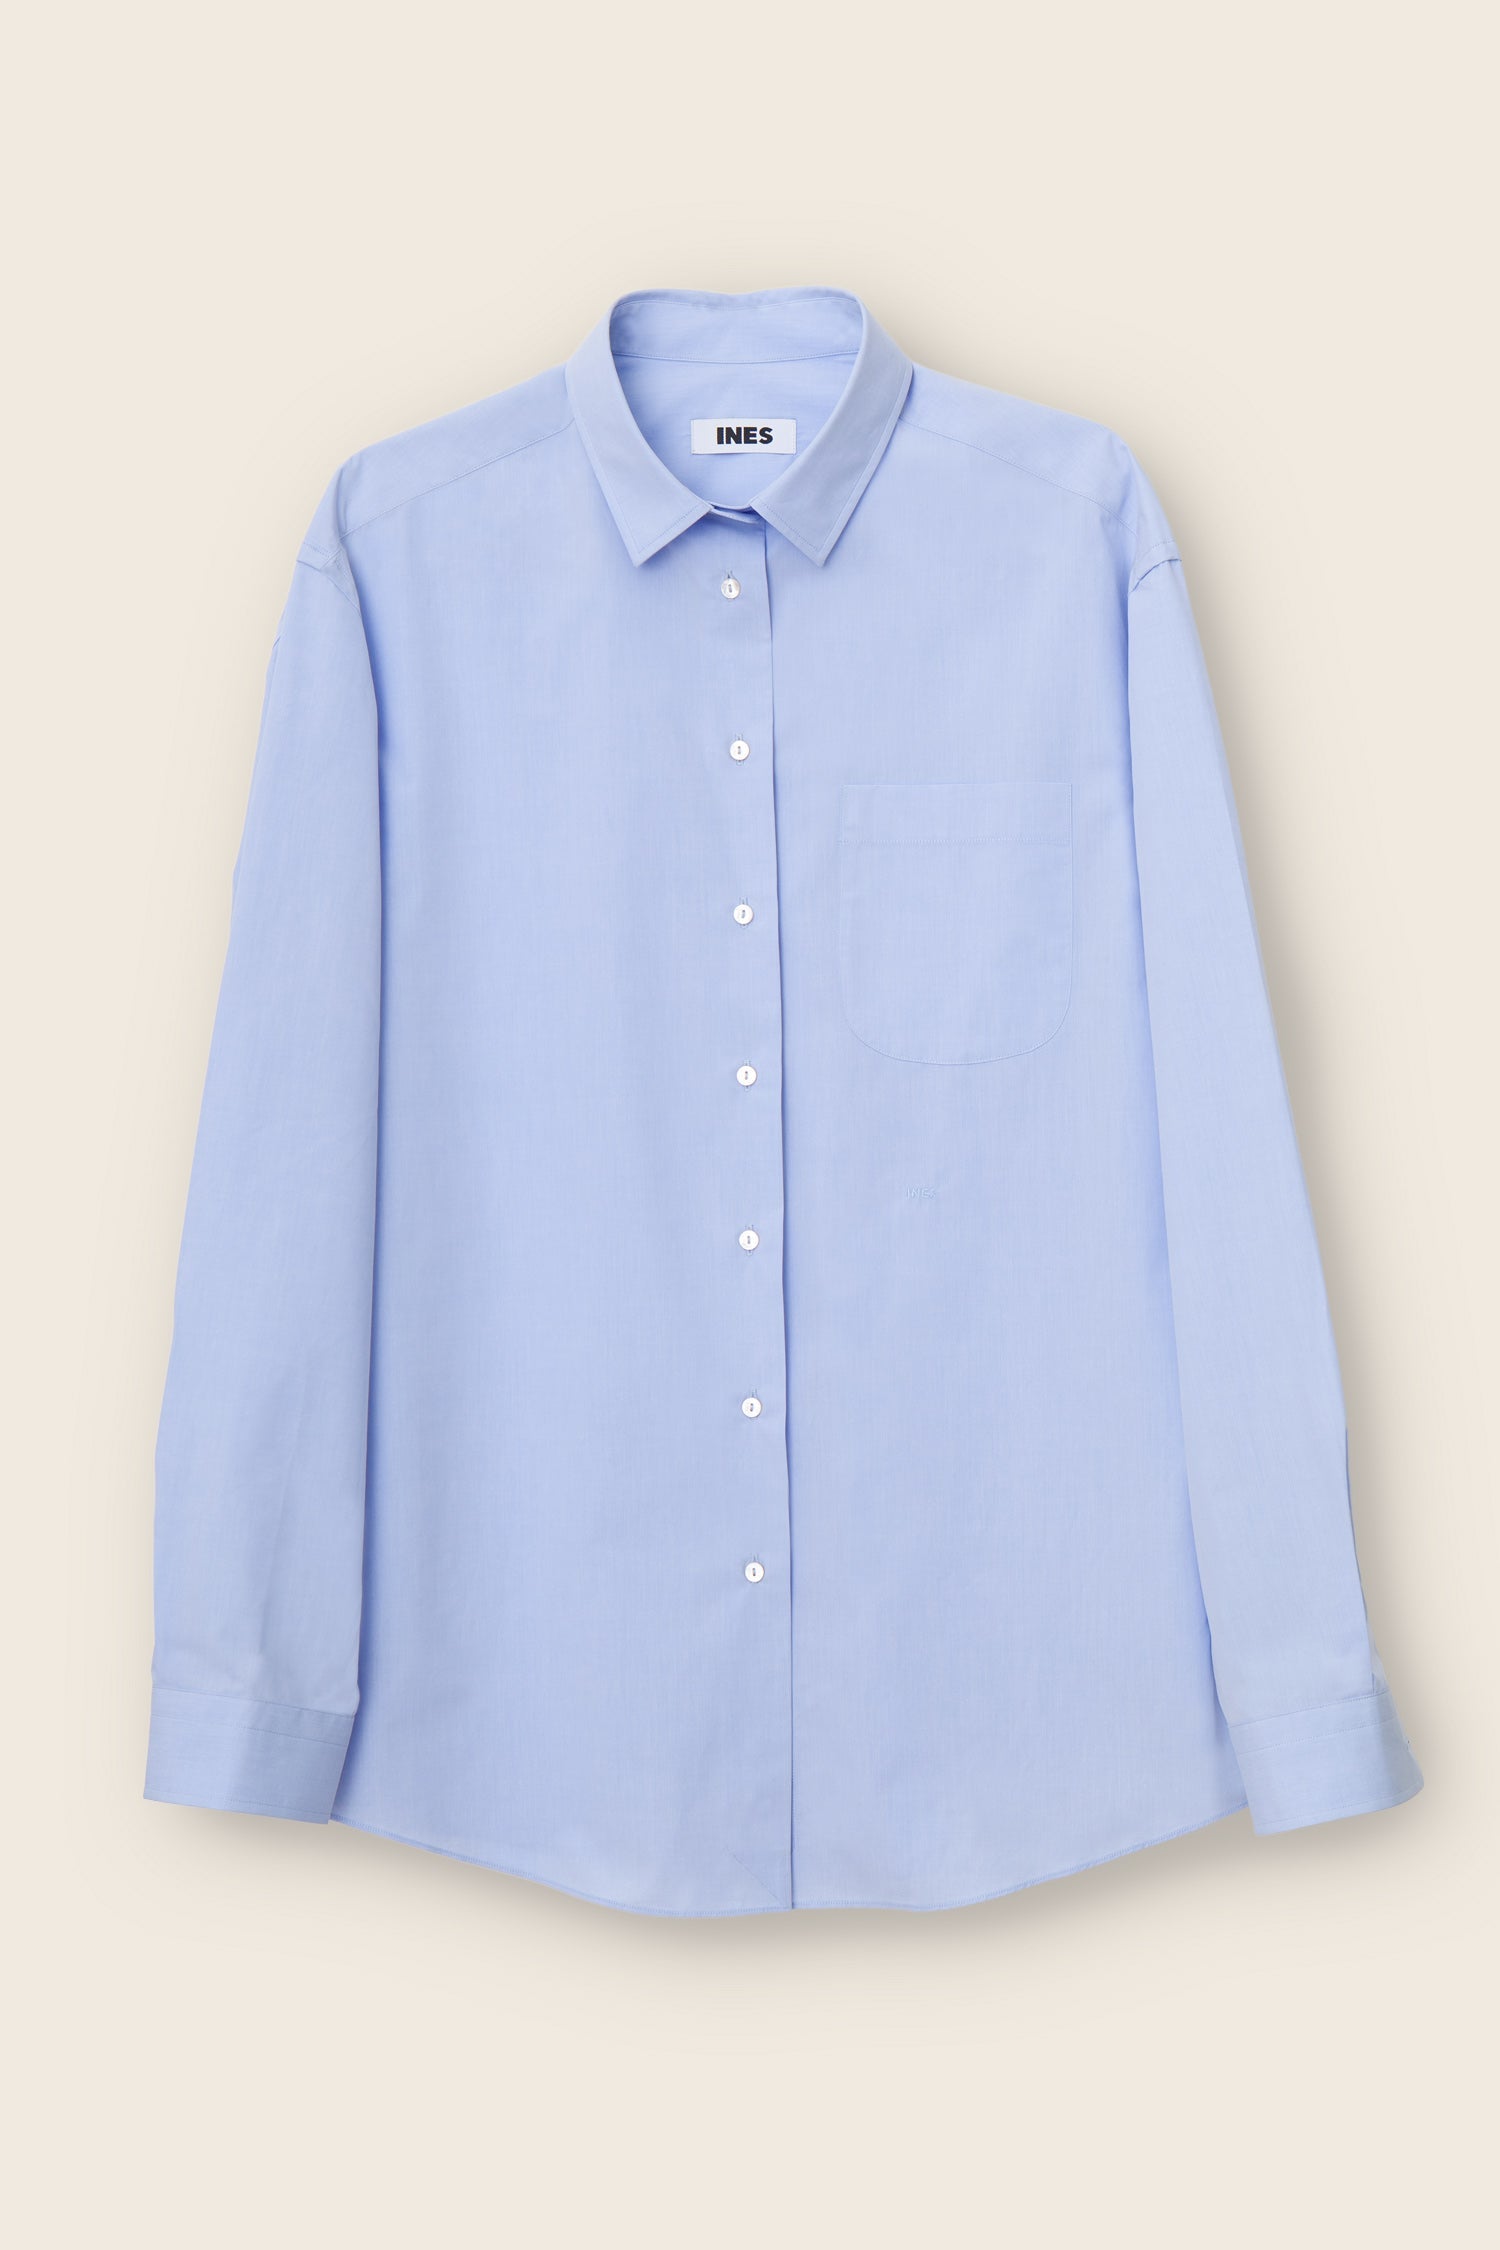 Oversized Classic Shirt in super soft cotton- PINK edition – INES